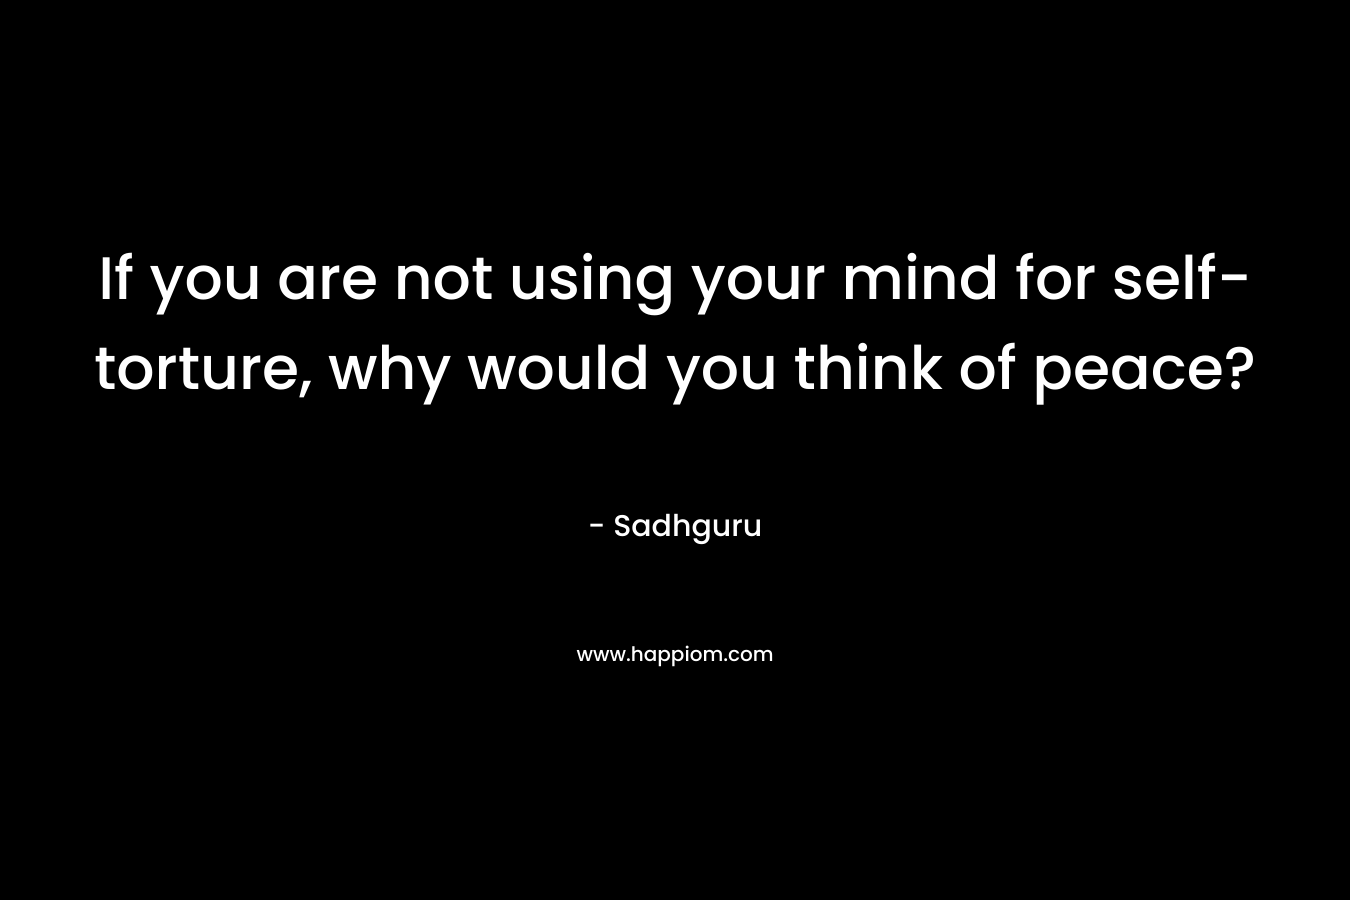 If you are not using your mind for self-torture, why would you think of peace?